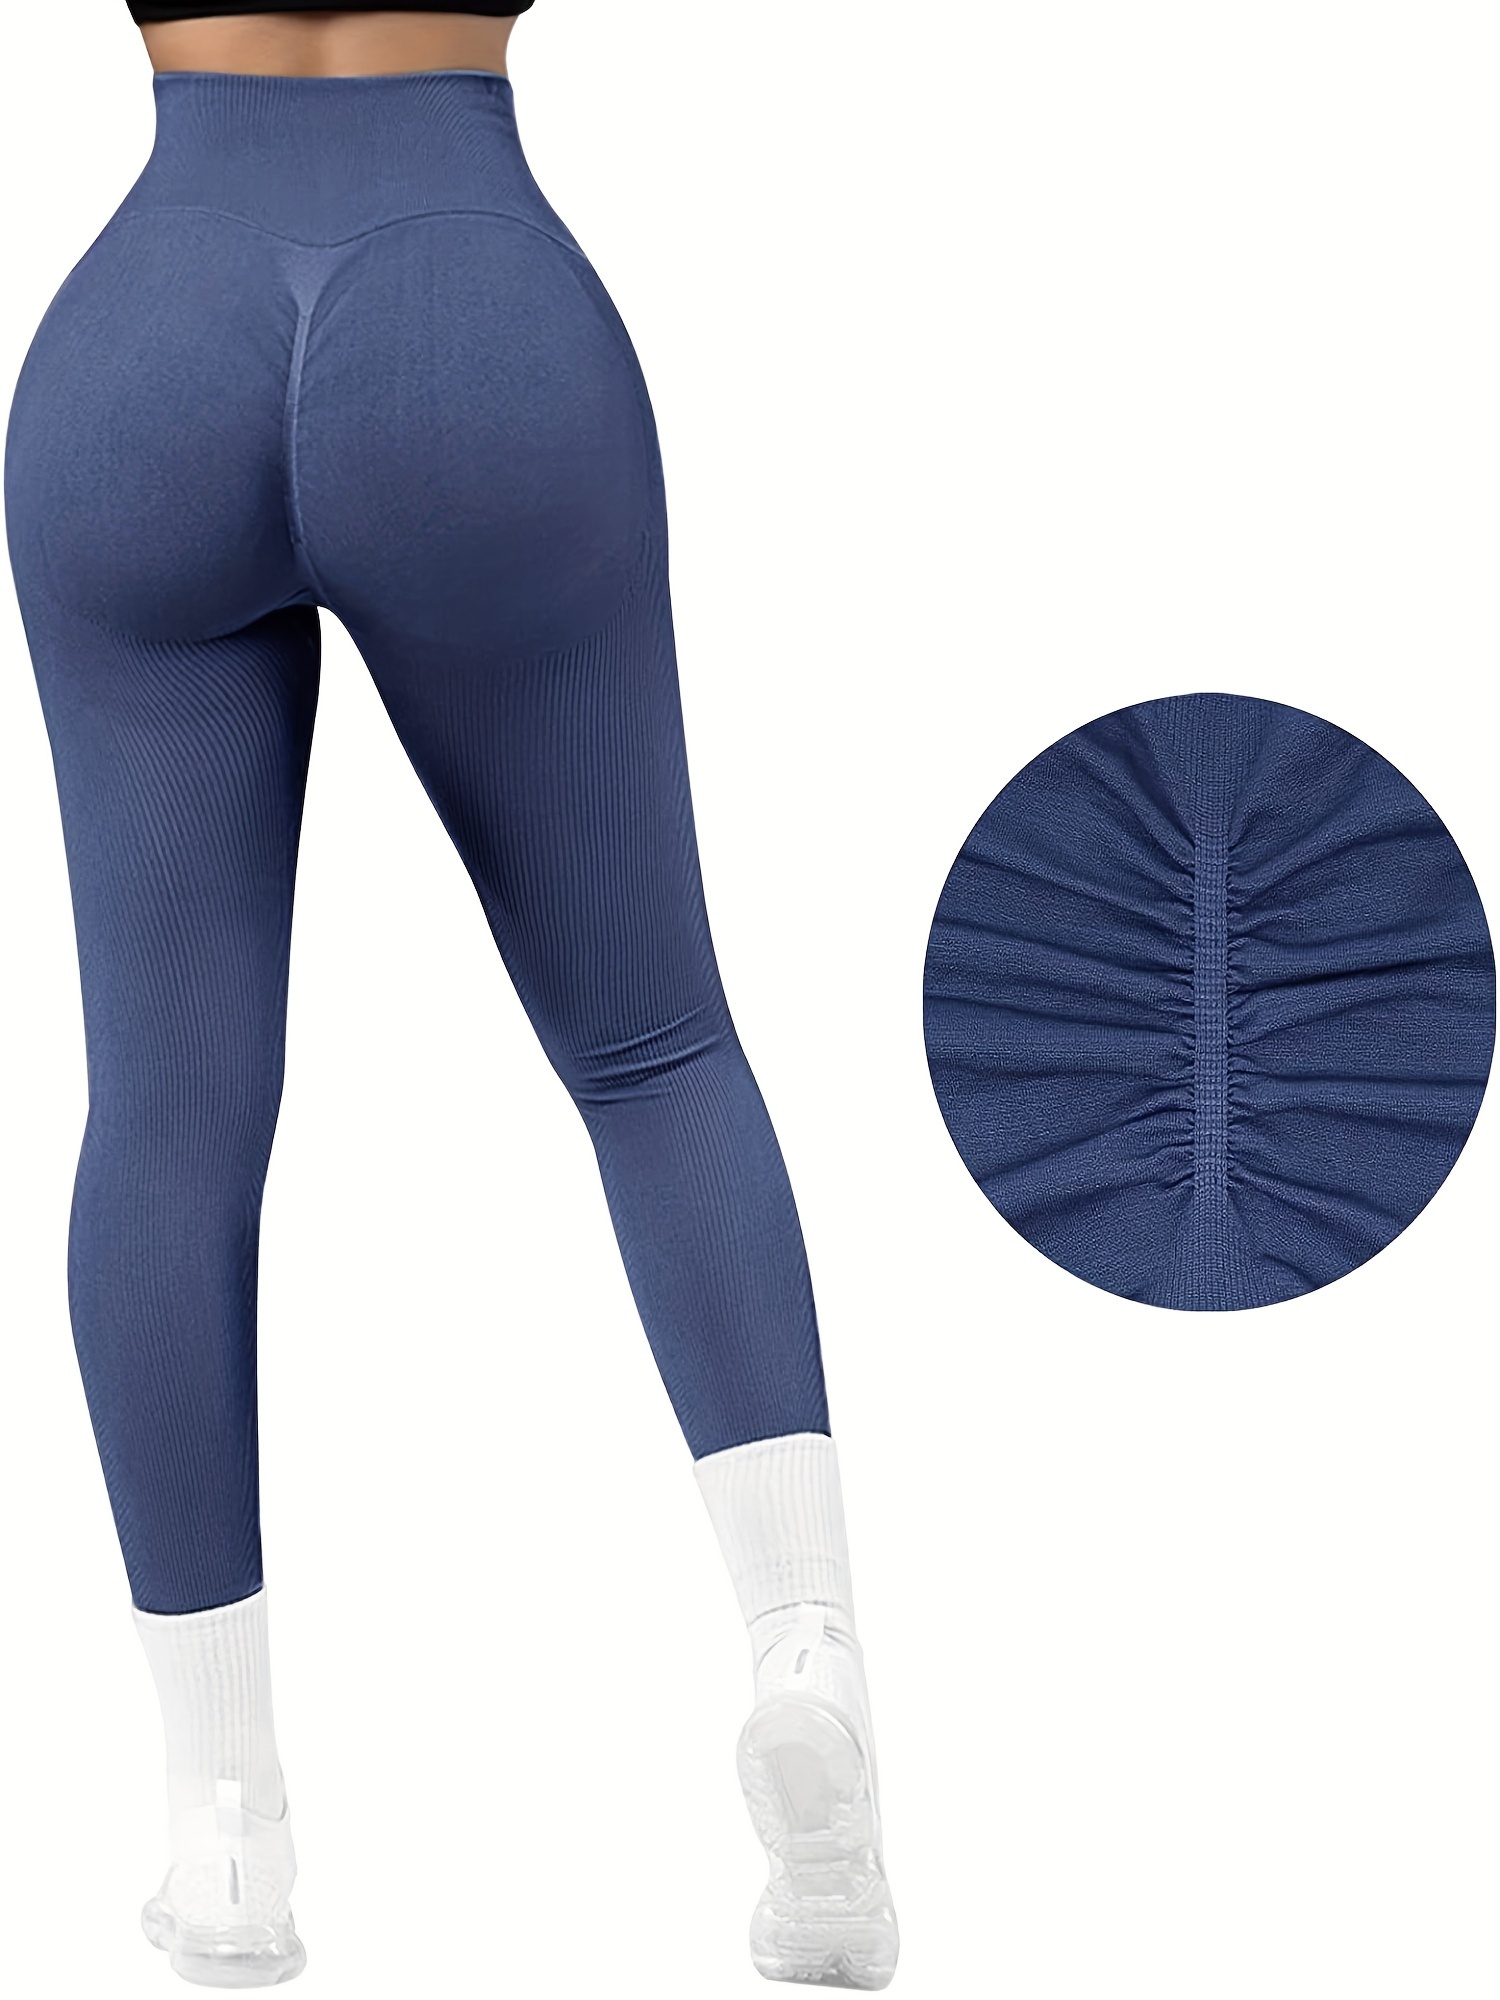 Women Sports Leggings Yoga Tights With Pockets Ribbed Pants For